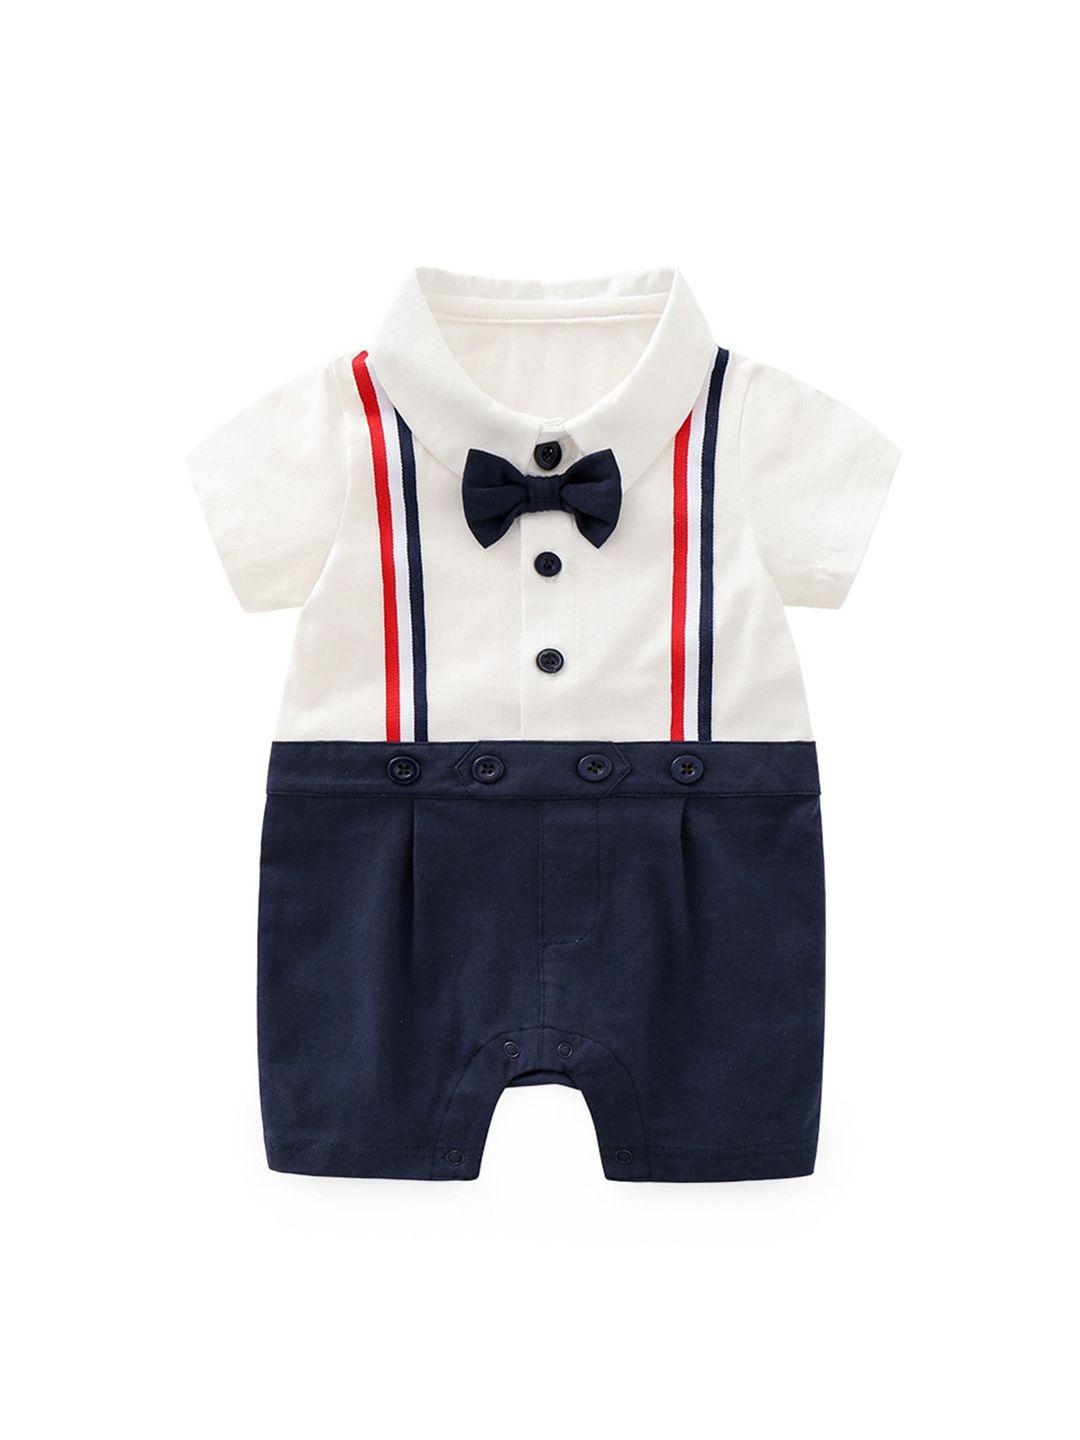 stylecast-navy-blue-infants-boys-cotton-rompers-with-aattached-bow